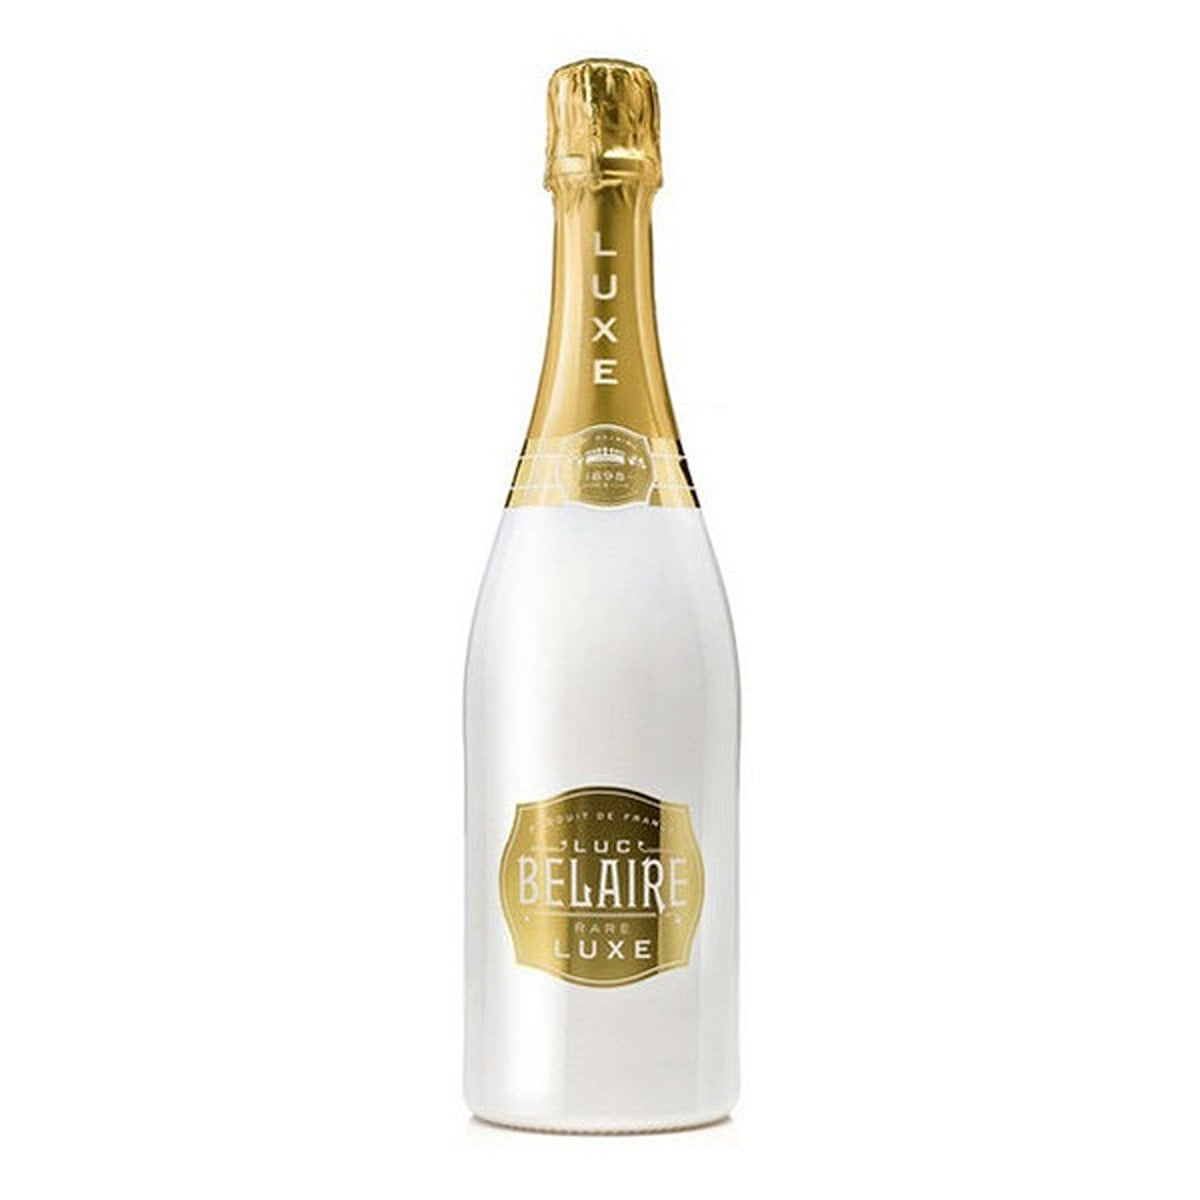 LUC BELAIRE RARE LUXE CUV 750ML